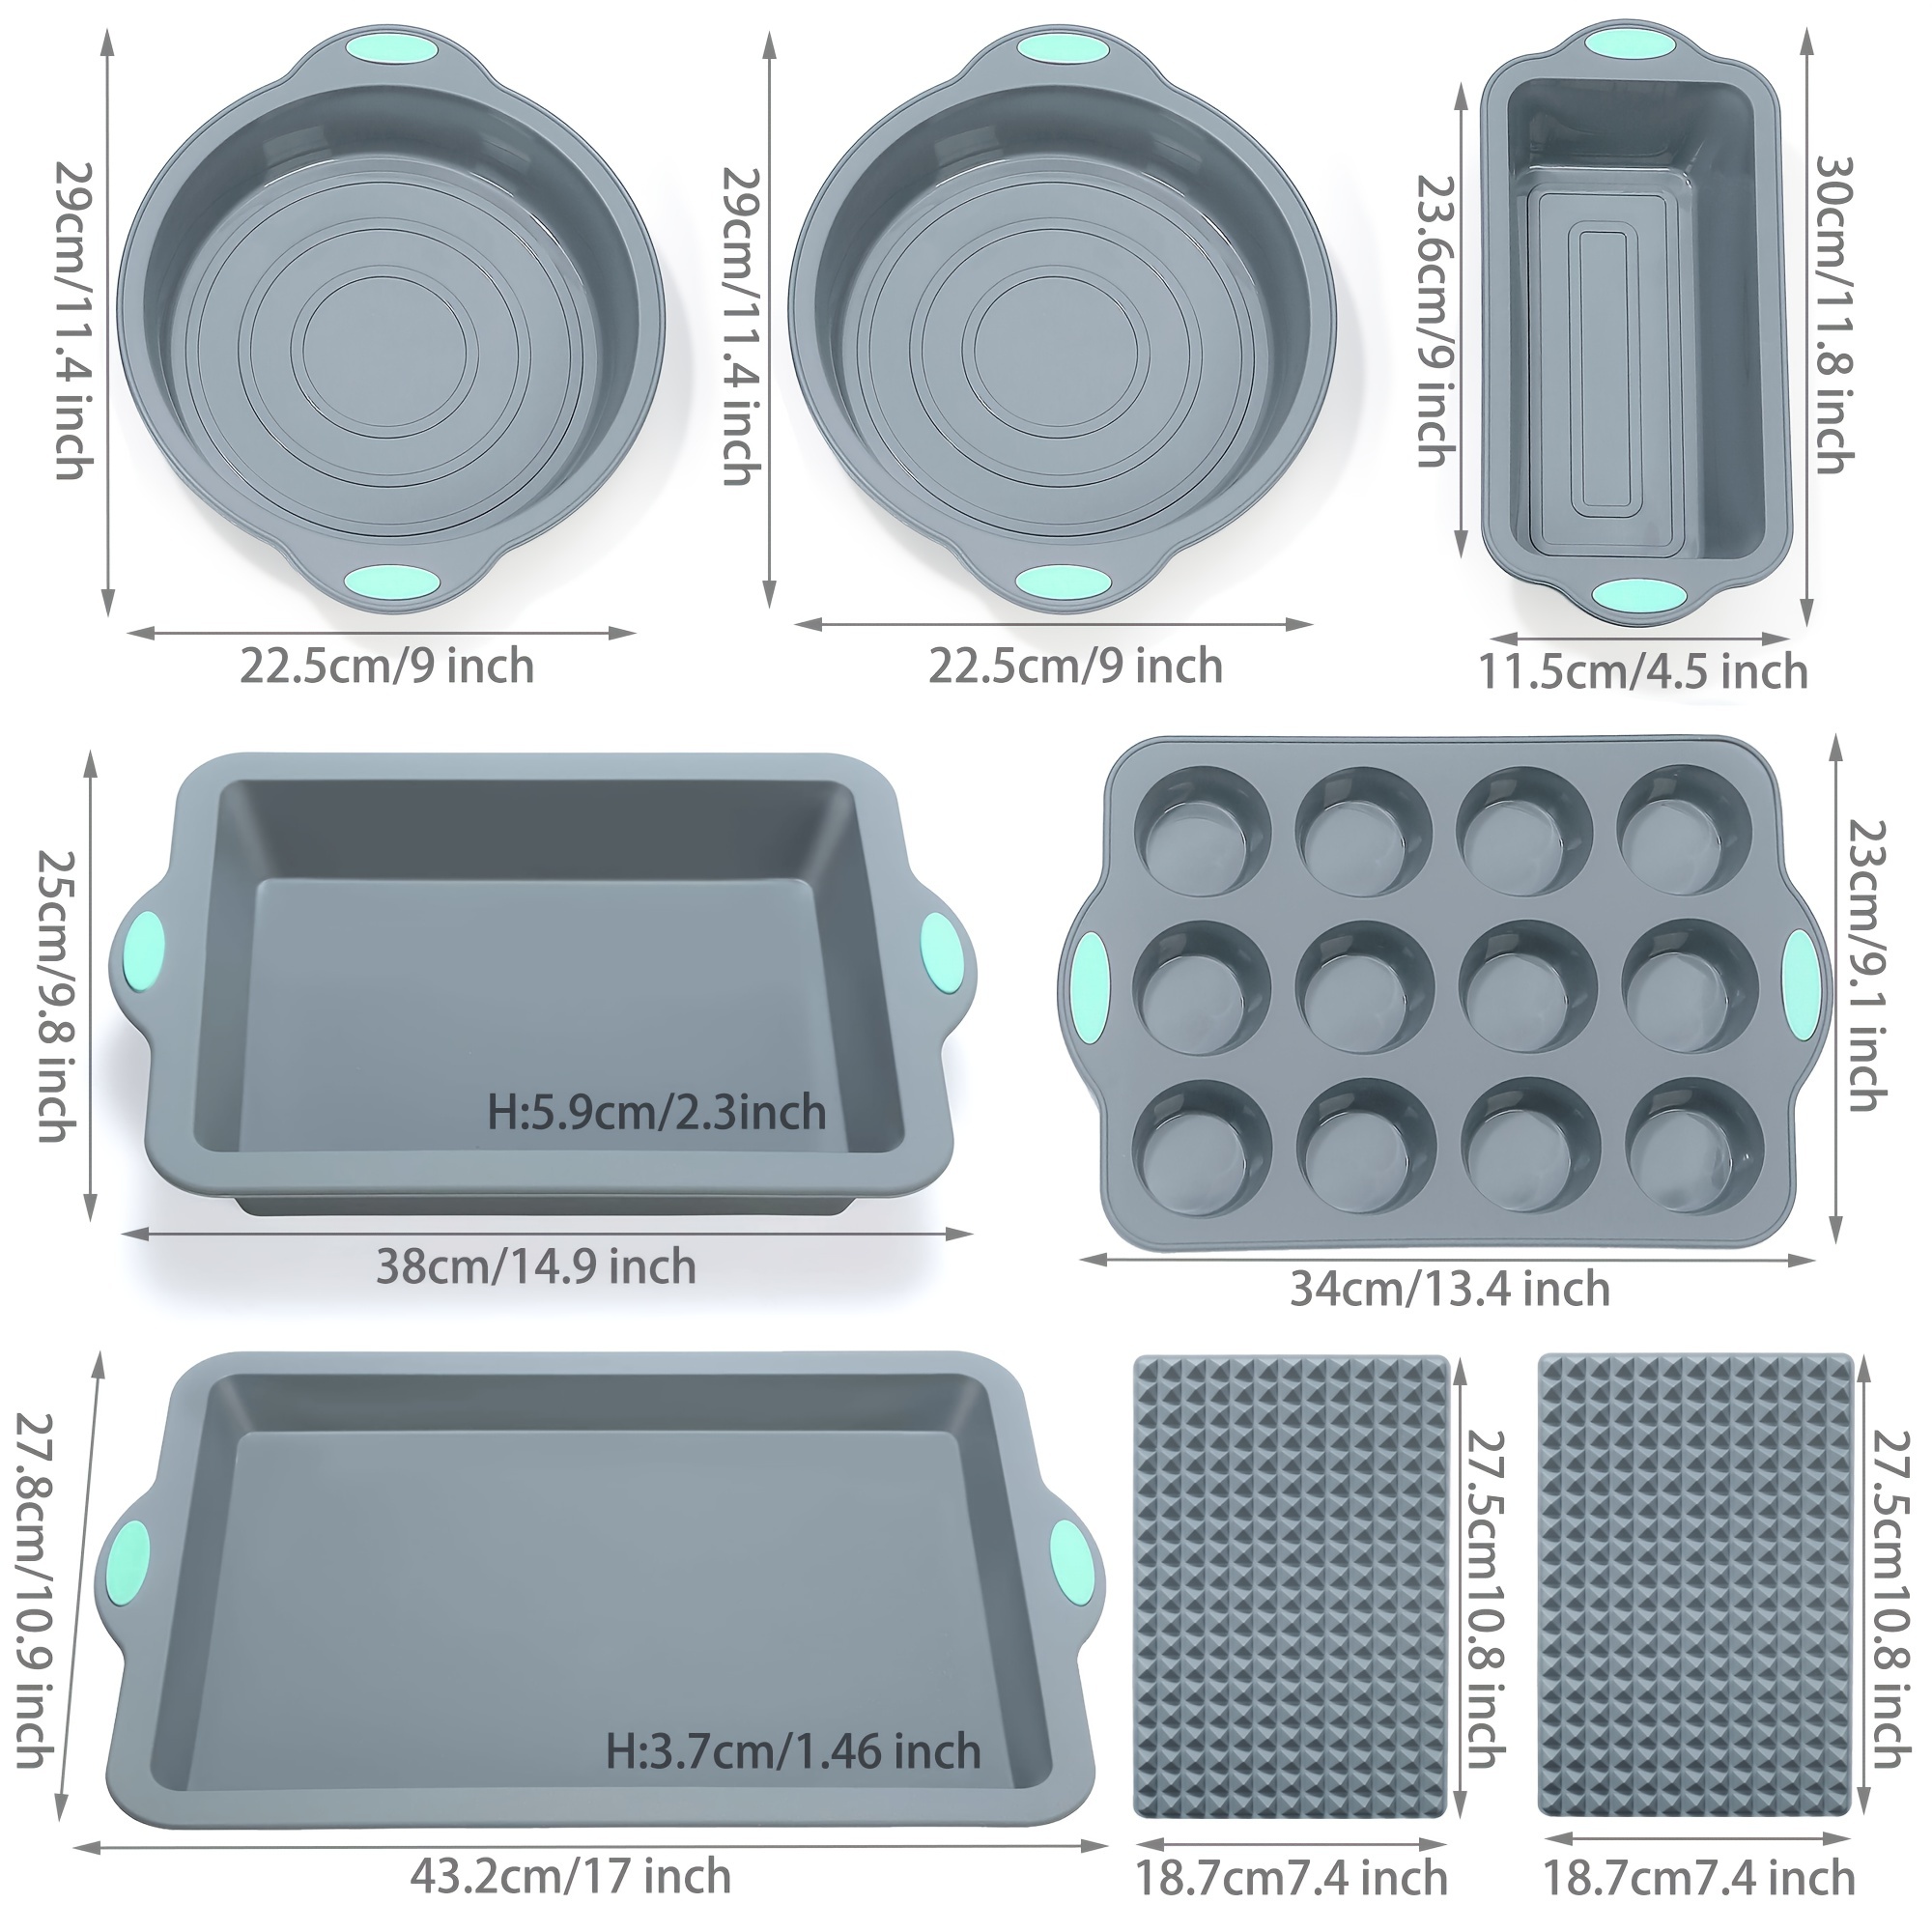 To encounter 8 in 1 Silicone Baking Set - 6 Silicone Molds - 2 Silicone  Baking Mat, Nonstick Cookie Sheet, Cake Muffin Bread Pan with Metal  Reinforced